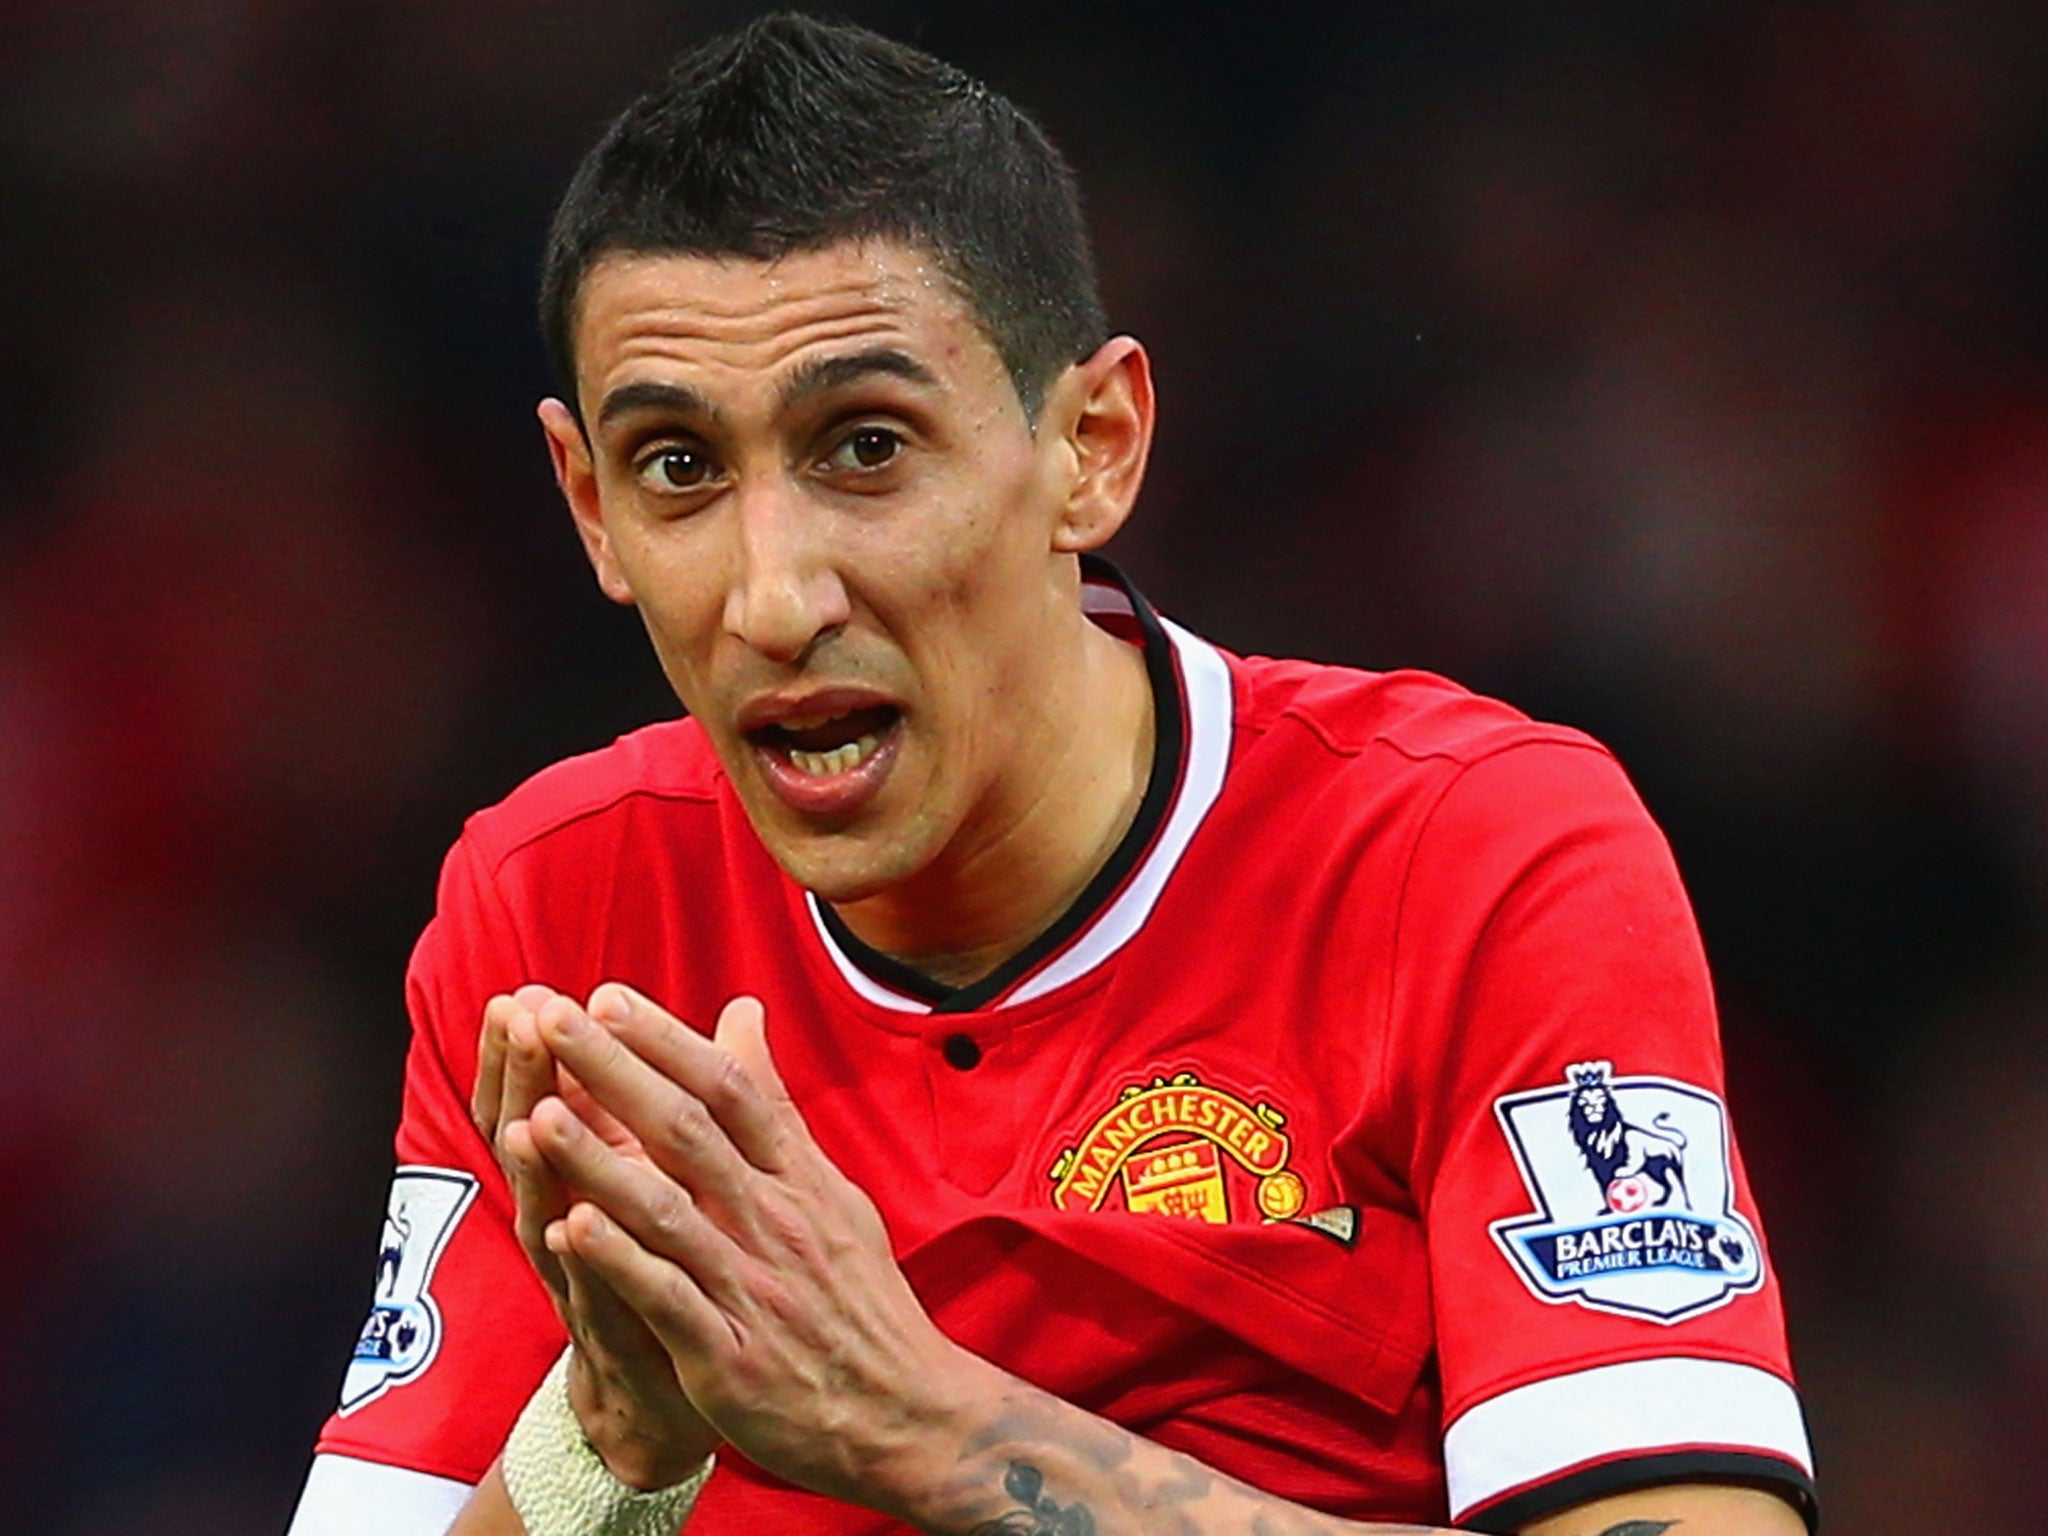 Manchester United winger Angel Di Maria has been linked a move away from Manchester United